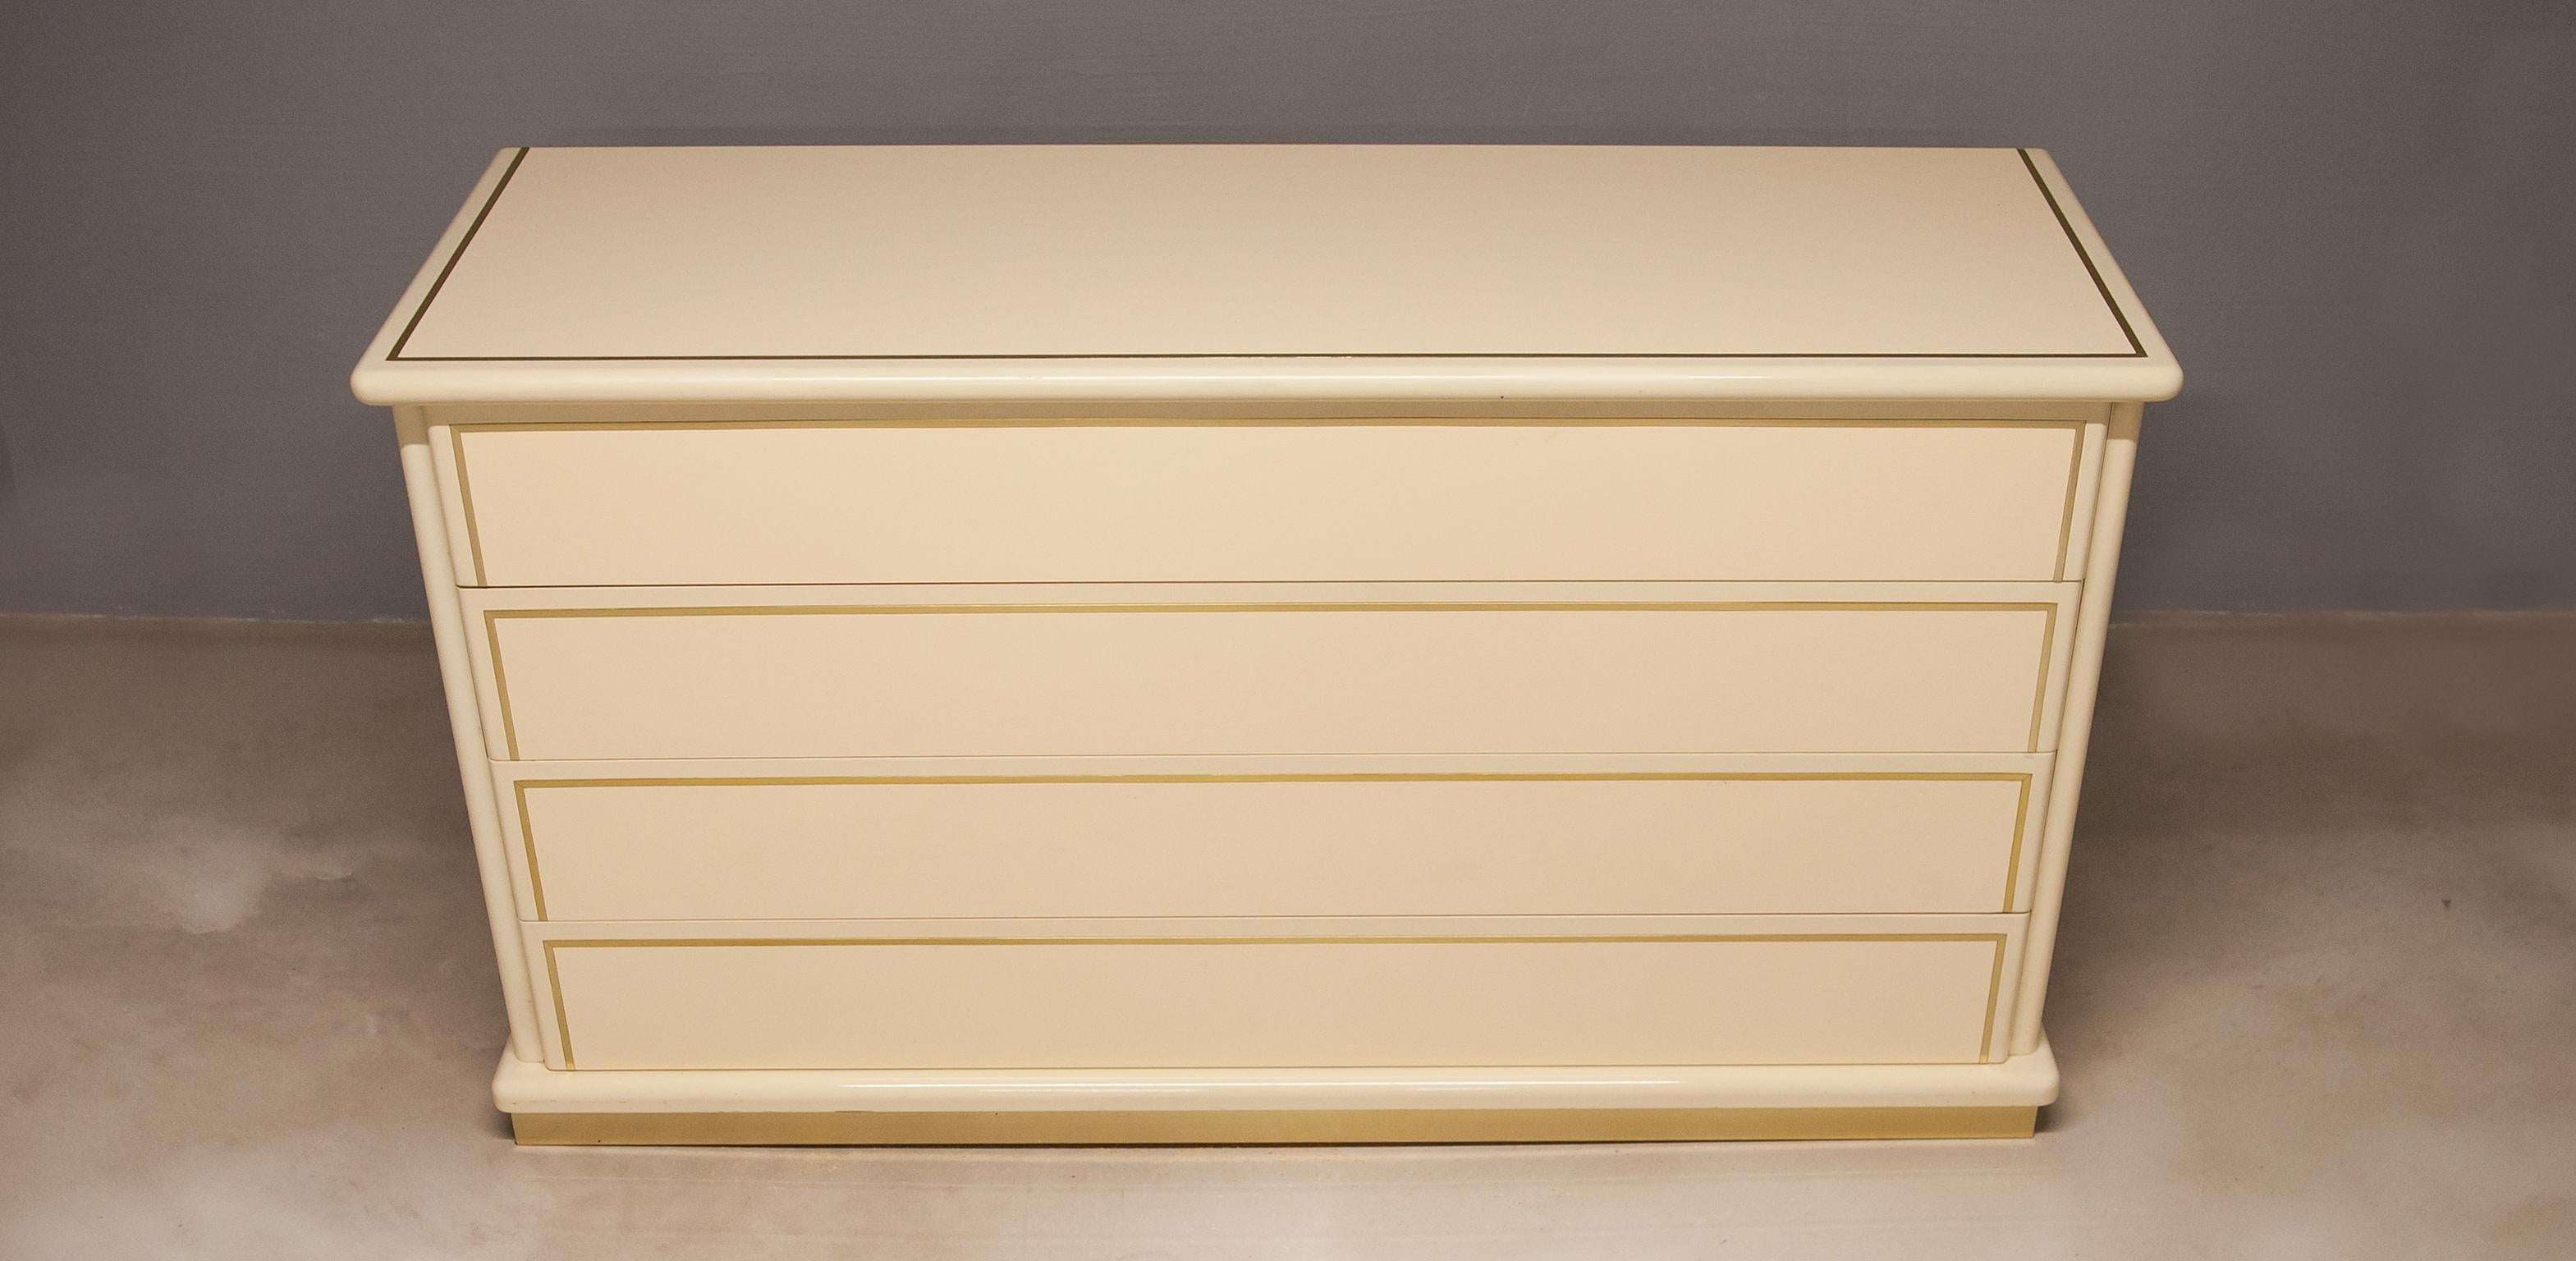 Elegant chest of drawers made by Maria Sabot and attributed to Willy Rizzo, Italy 1970s. Cream white lacquered surface with brass details.